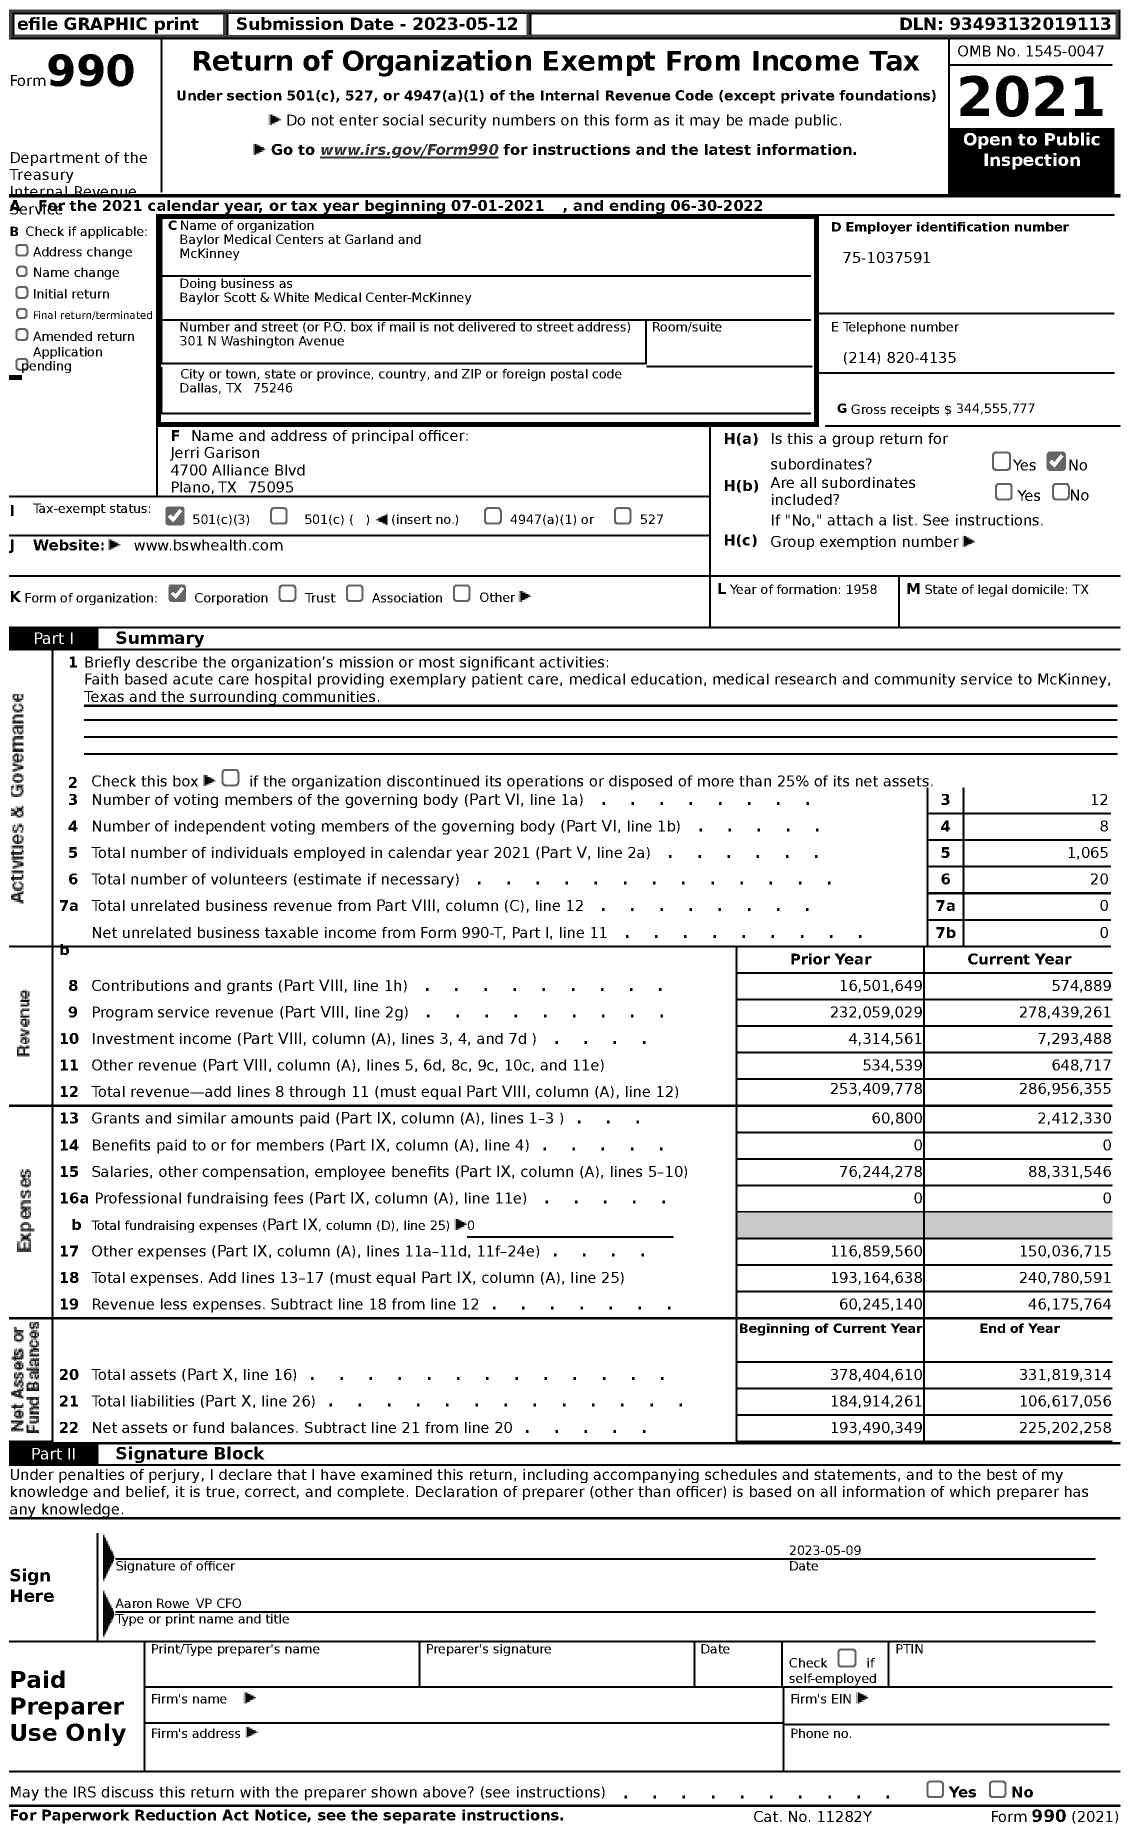 Image of first page of 2021 Form 990 for Baylor Scott & White Medical Center-McKinney